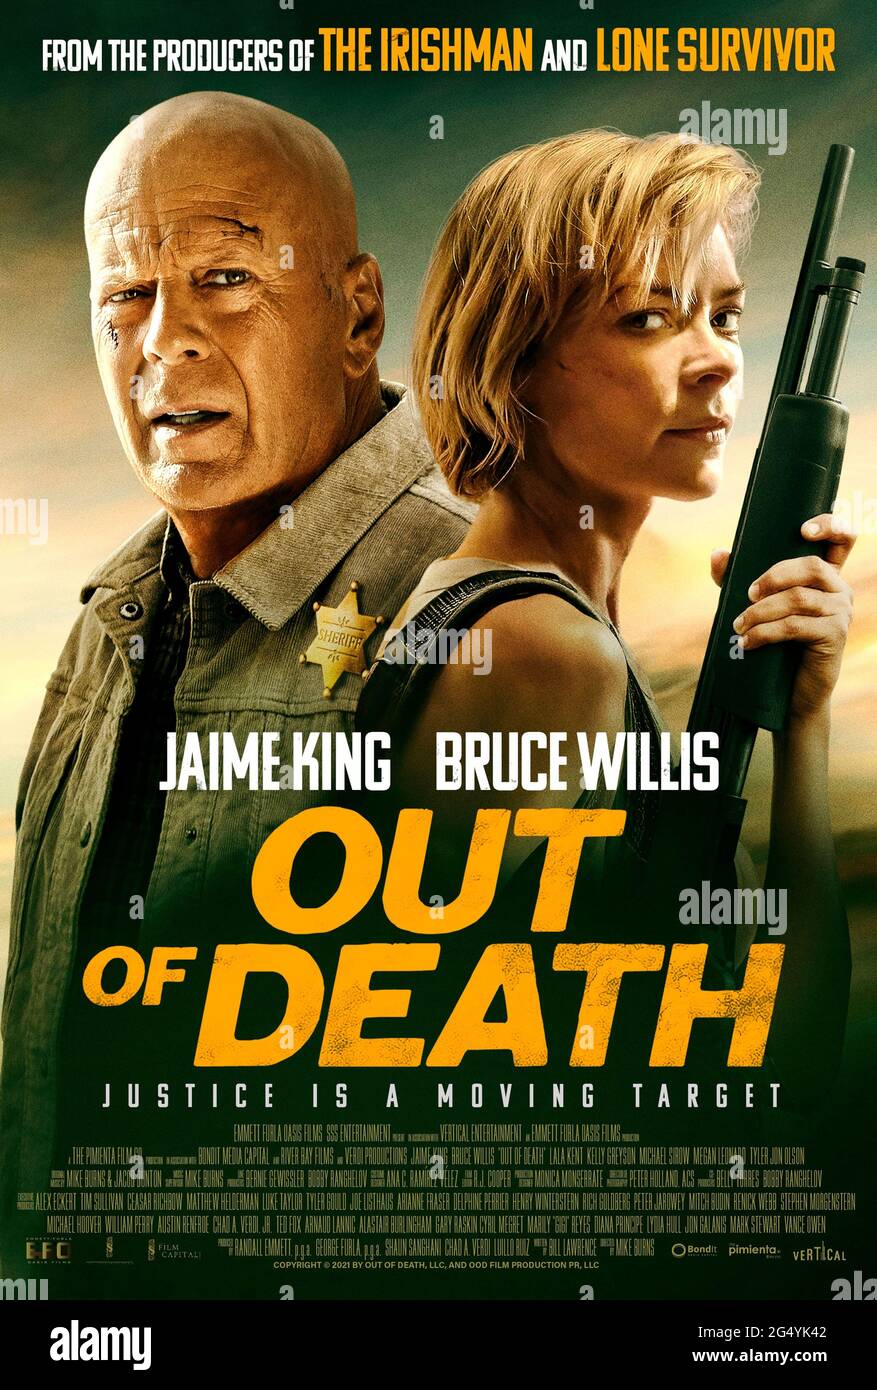 Out of Death (2021) directed by Mike Burns and starring Bruce Willis, Jaime King and Lala Kent. A corrupt Sheriff's department in a rural mountain town comes undone when an unintended witness throws a wrench into their shady operation. Stock Photo